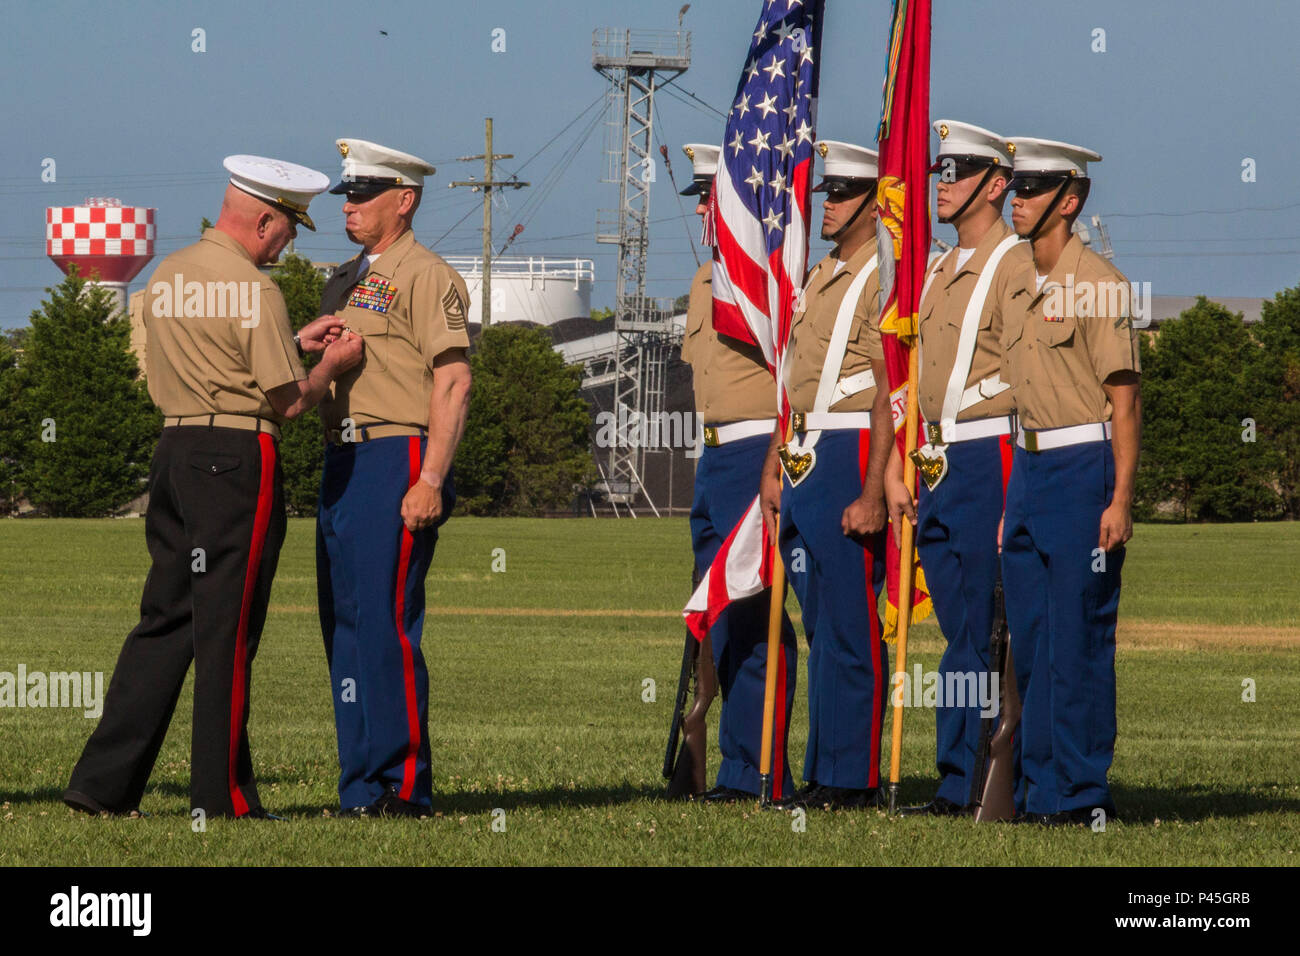 U.S. Marine Corps Maj. Gen. Walter L. Miller Jr. (left), commanding general, II Marine Expeditionary Force, presents Sgt. Maj. Paul A. Berry, with a Legion of Merit Medal during his retirement ceremony, William Pendleton Thomas Hill Field, June 9, 2016. Berry retired after 30 years of honorable and faithful service. (U.S. Marine Corps photo by Lance Cpl. Judith L. Harter, MCIEAST Combat Camera/Released) Stock Photo